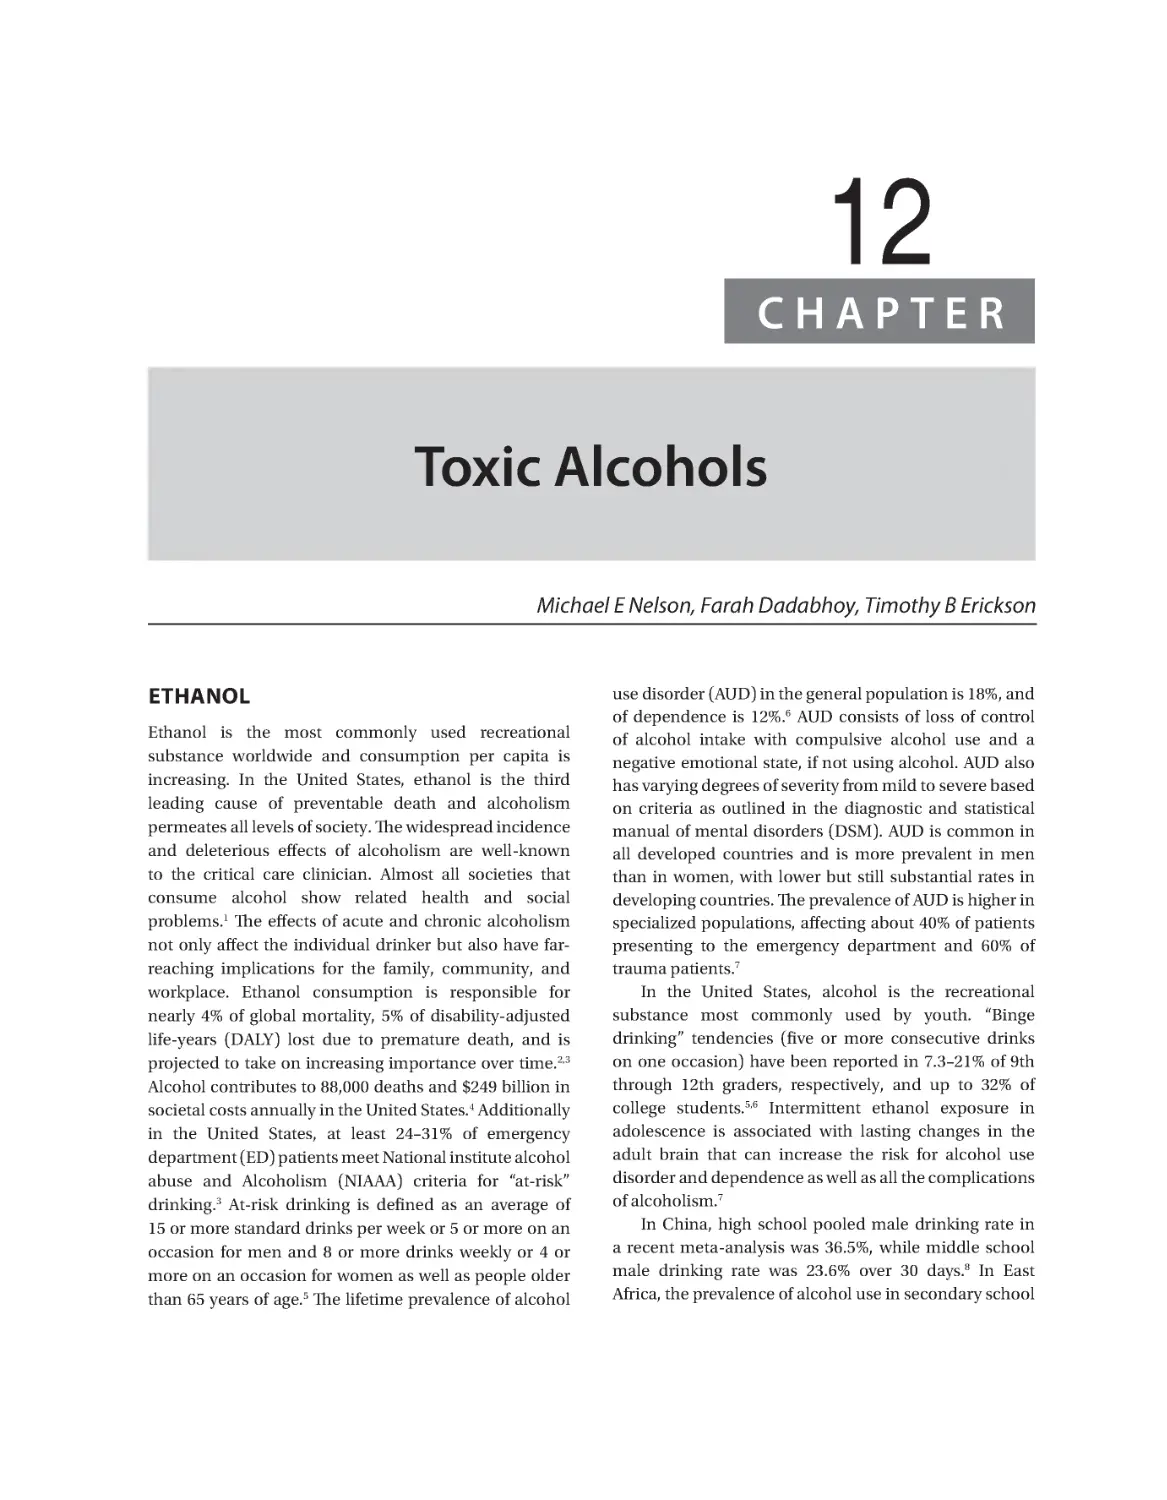 Chapter 12: Toxic Alcohols